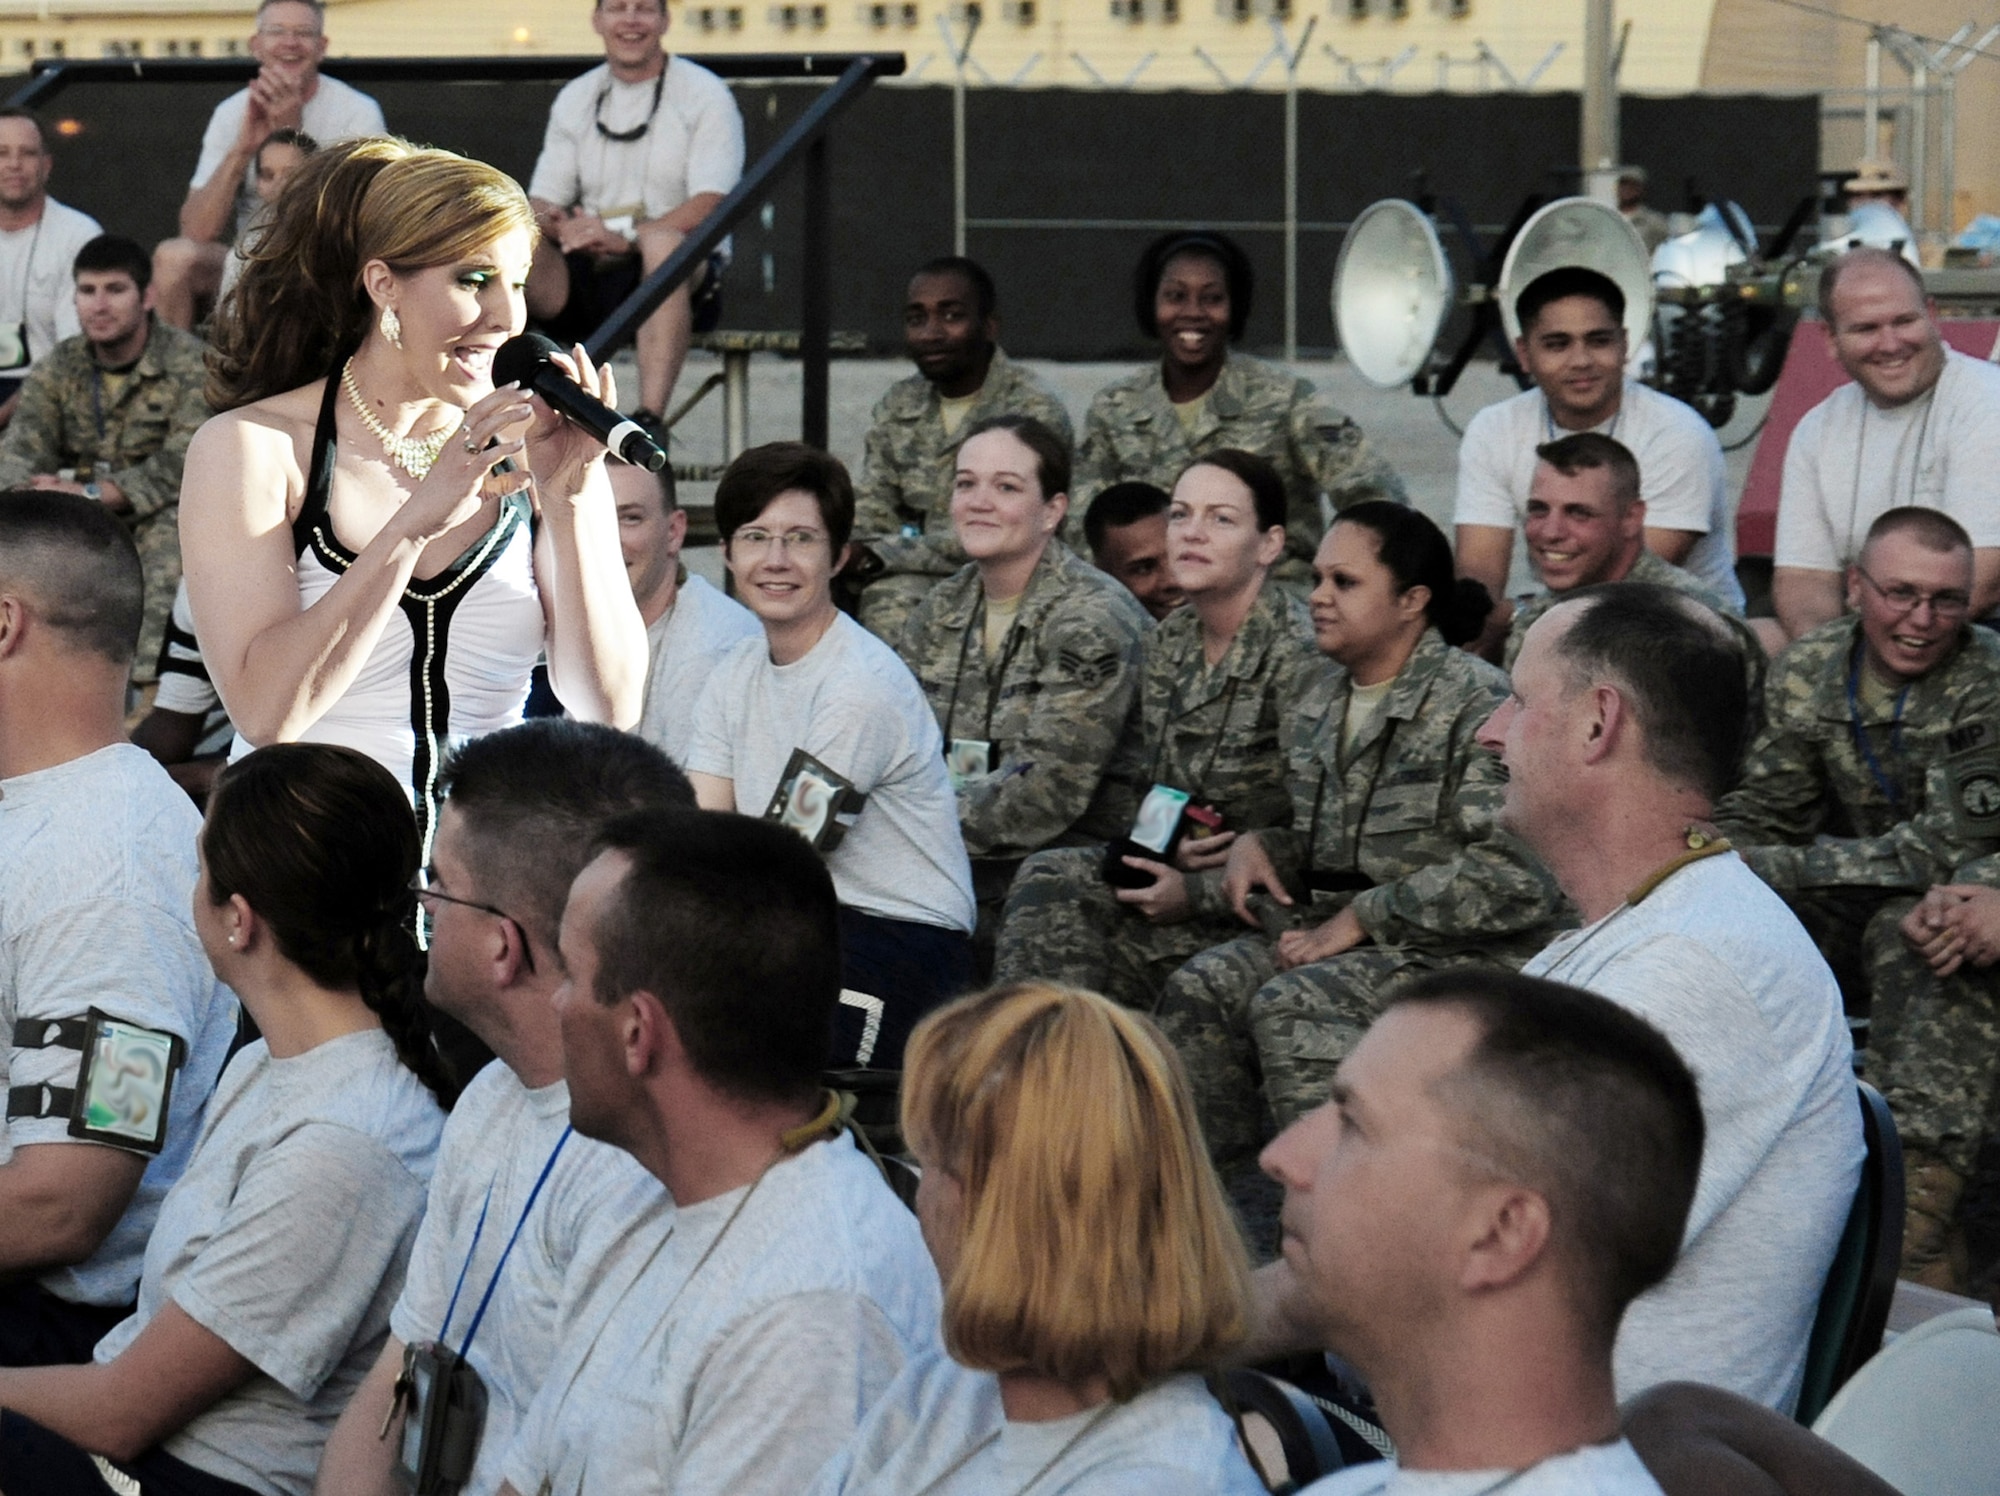 Staff Sgt. Naomi Keen gets up-close and personal with the crowd during a Tops In Blue show July 9 at Manas Air Base, Kyrgyzstan. Sergeant Keen is a 59th Surgical Operations Squadron health services craftsman stationed at Lackland Air Force Base, Texas, and hails from Simpsonville, Texas. (U.S. Air Force photo/Senior Airman Steele Britton) 